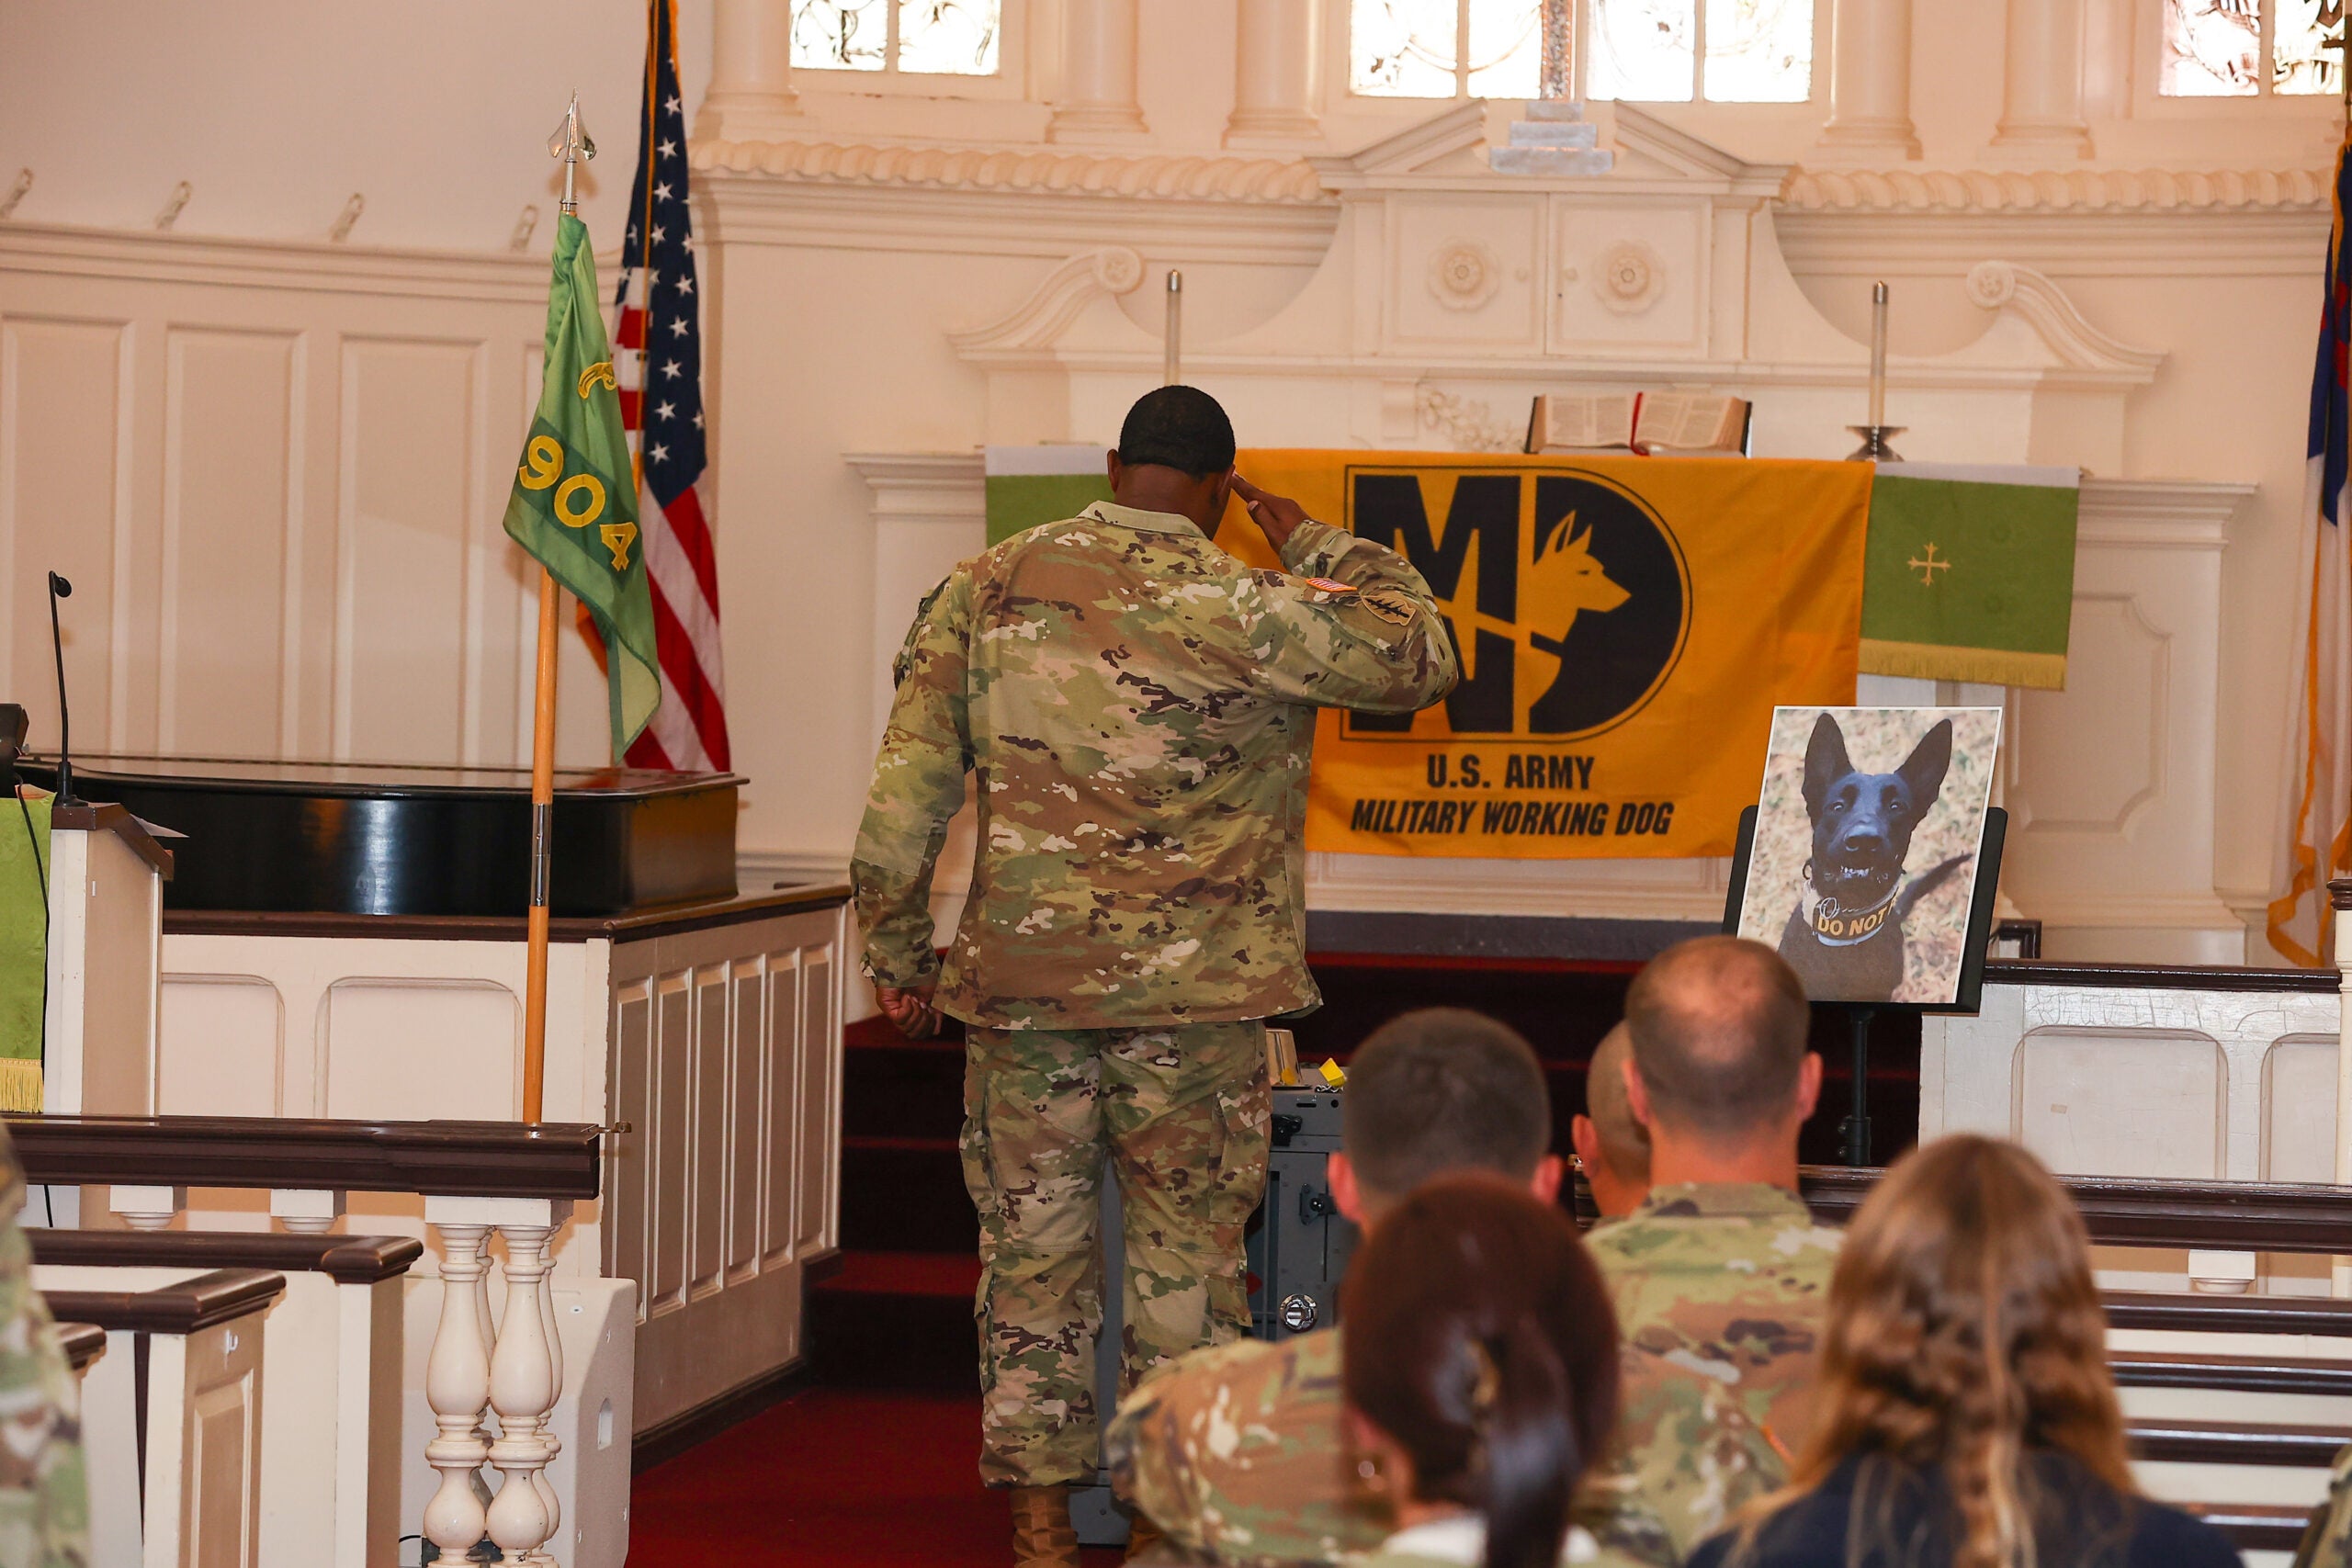 FORT BENNING, Ga – Soldiers from the 904th Military Working Dog Detachment, attend the memorial ceremony of MWD Ccruz, October 13, 2022 at the Infantry Chapel. MWD Ccruz 4 year military career with Spc. Ramos from both Fort Campbell and Fort Benning where his duties consisted of Military Working Dog demonstrations, Law Enforcement Support and Force Protection support for the Communities on the Installation. (U.S. Army photo by Markeith Horace, Fort Benning Maneuver Center of Excellence photographer)